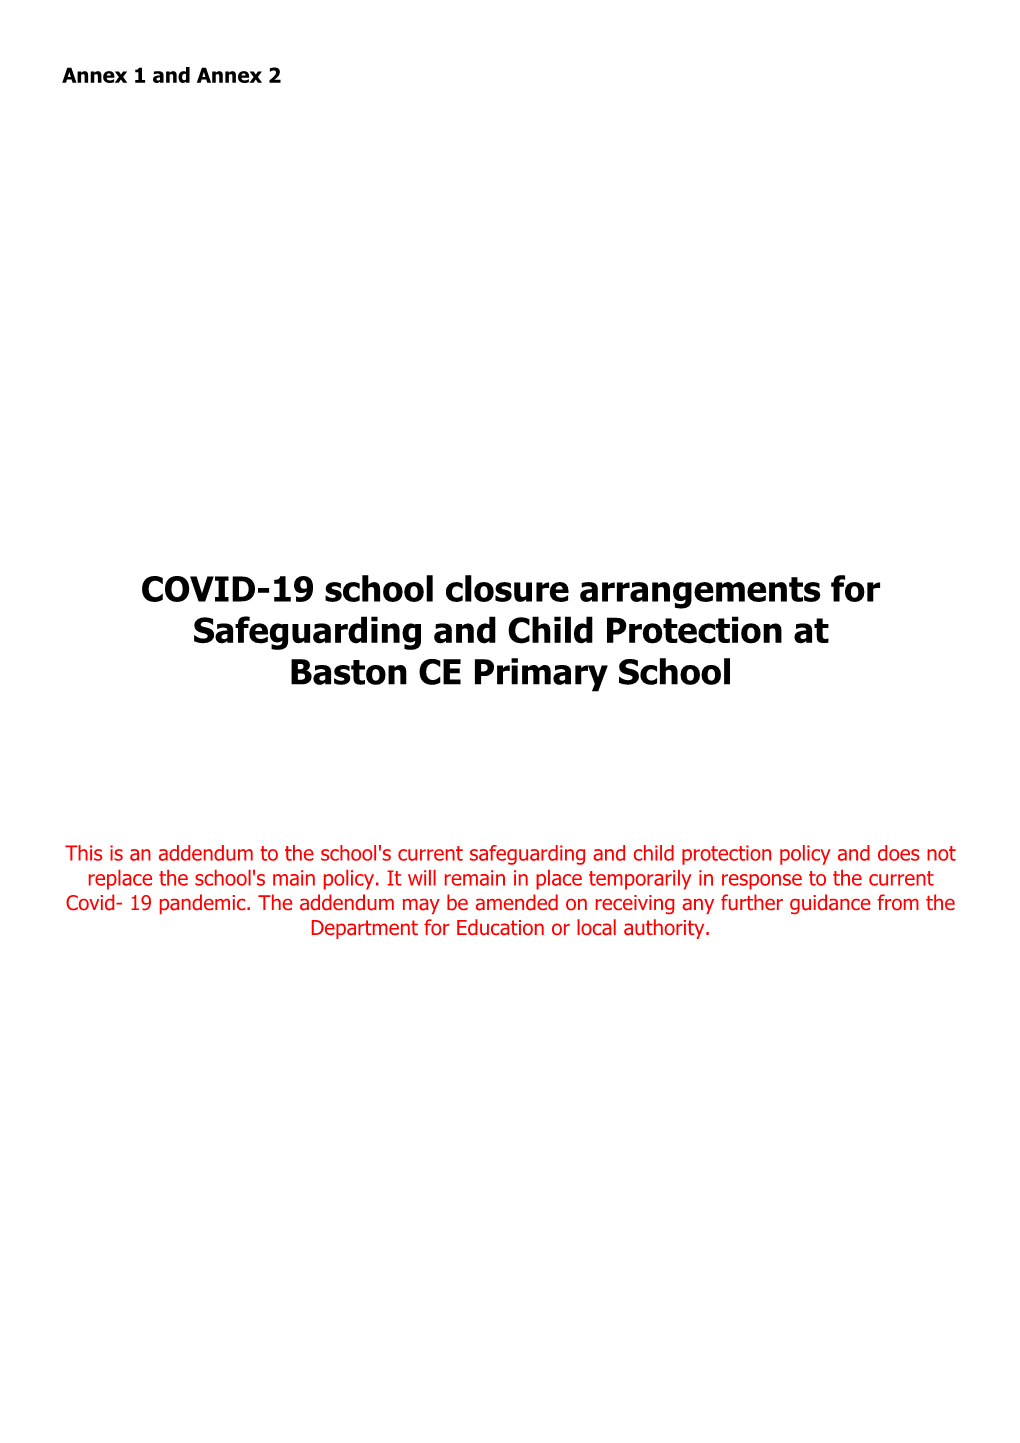 COVID-19 School Closure Arrangements for Safeguarding and Child Protection at Baston CE Primary School